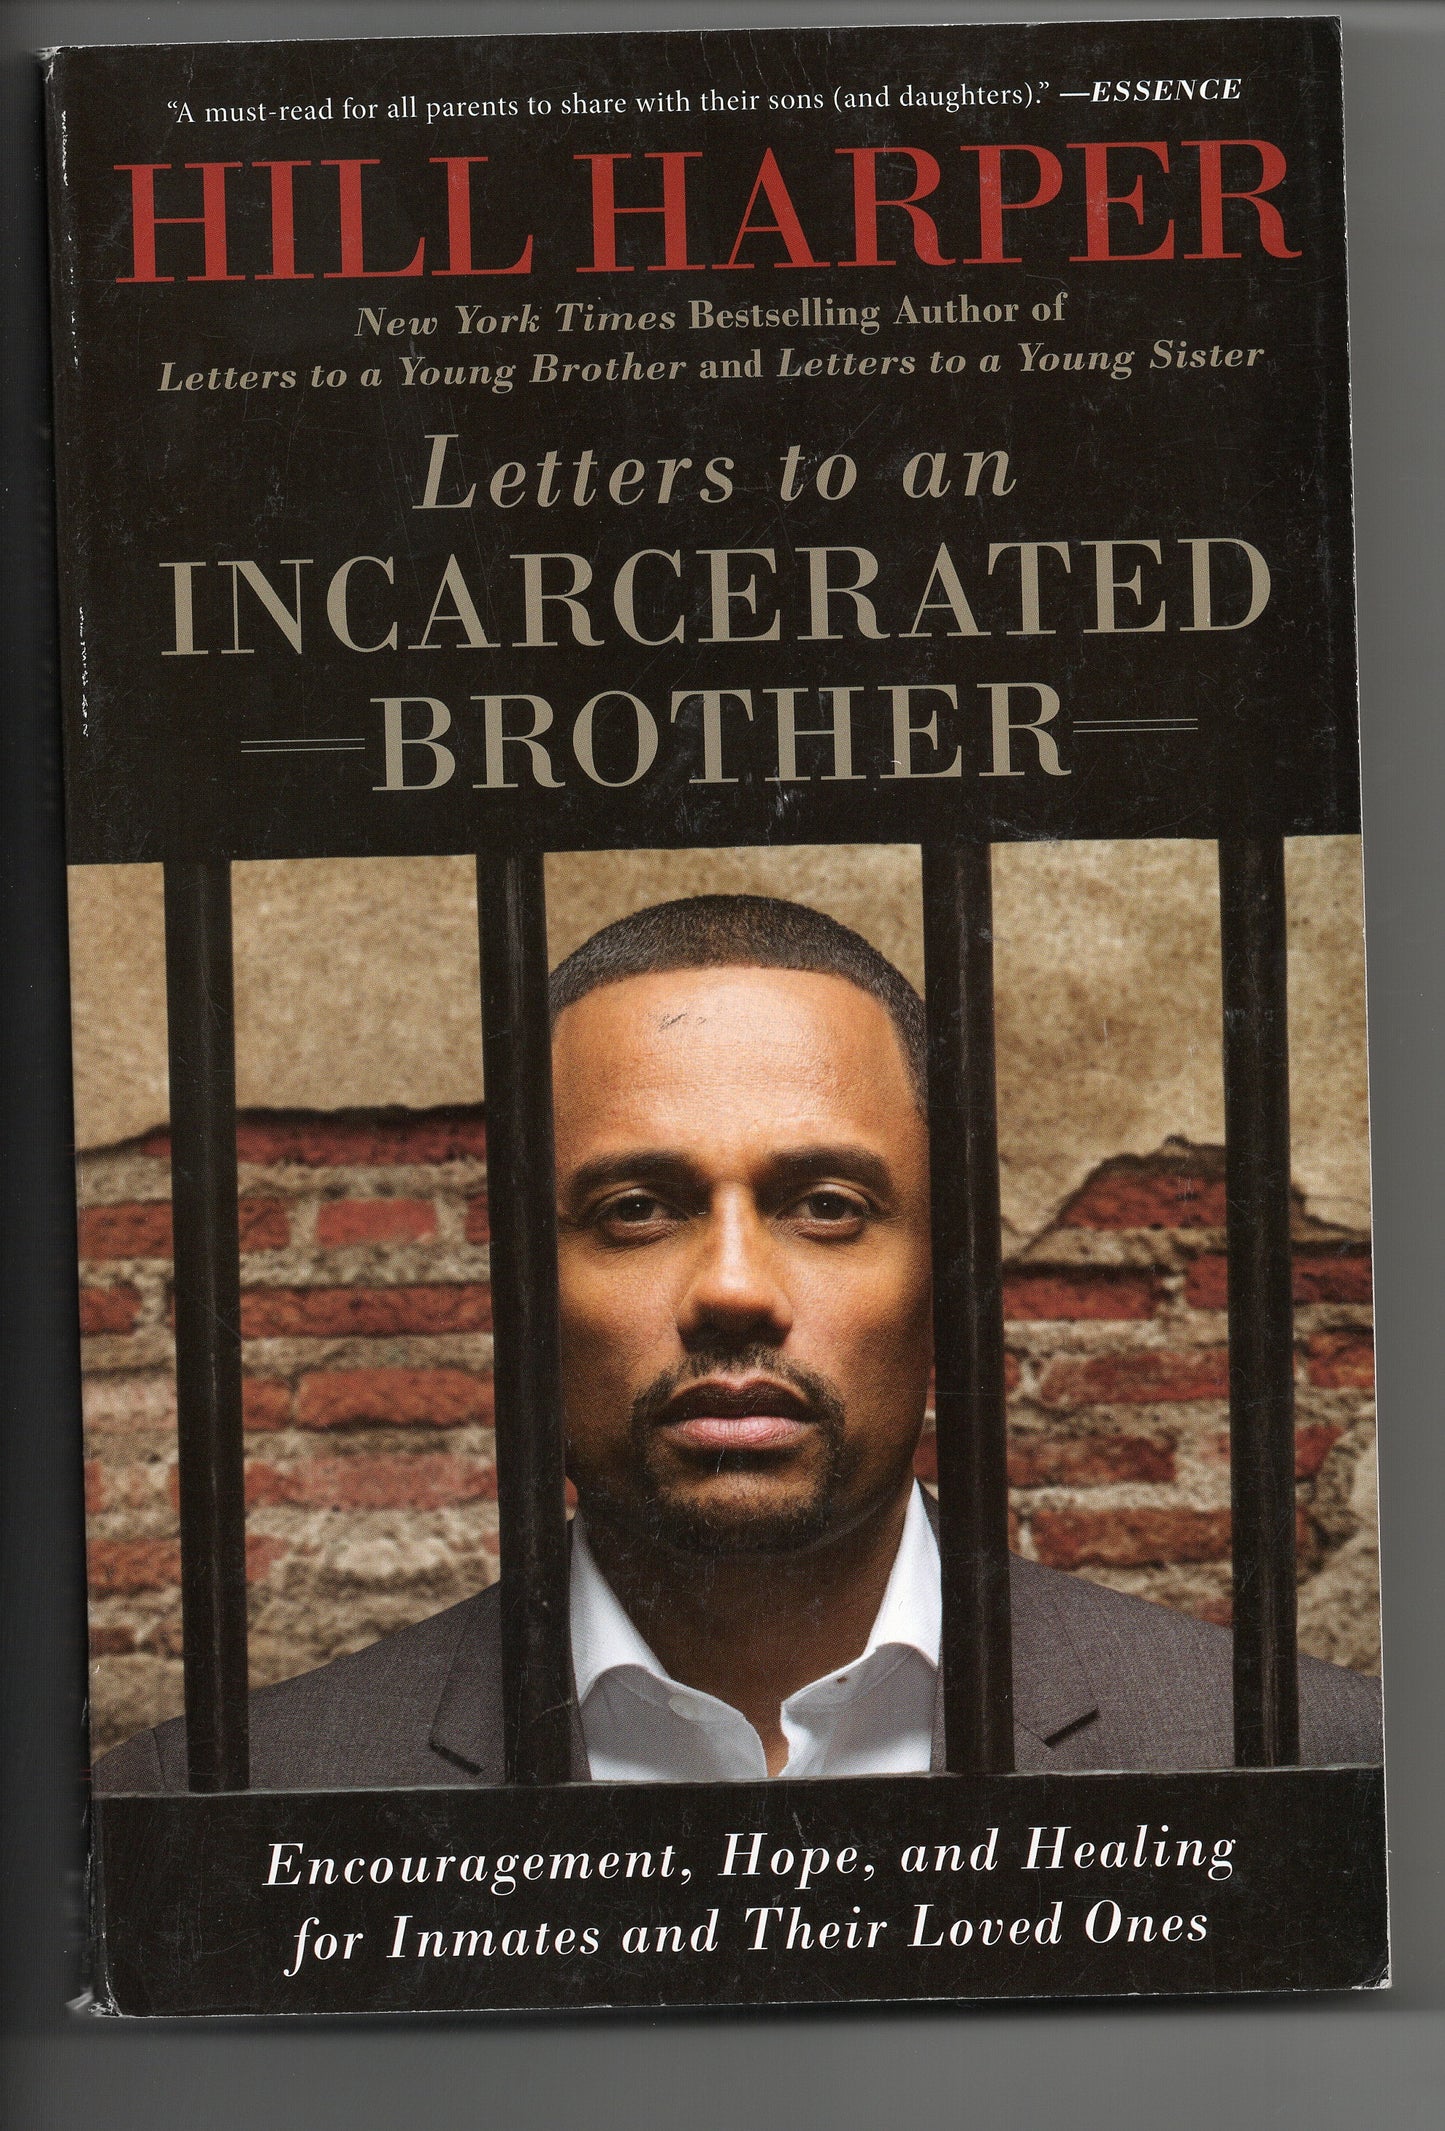 Hill Harper - Letters to and Incarcerated brother